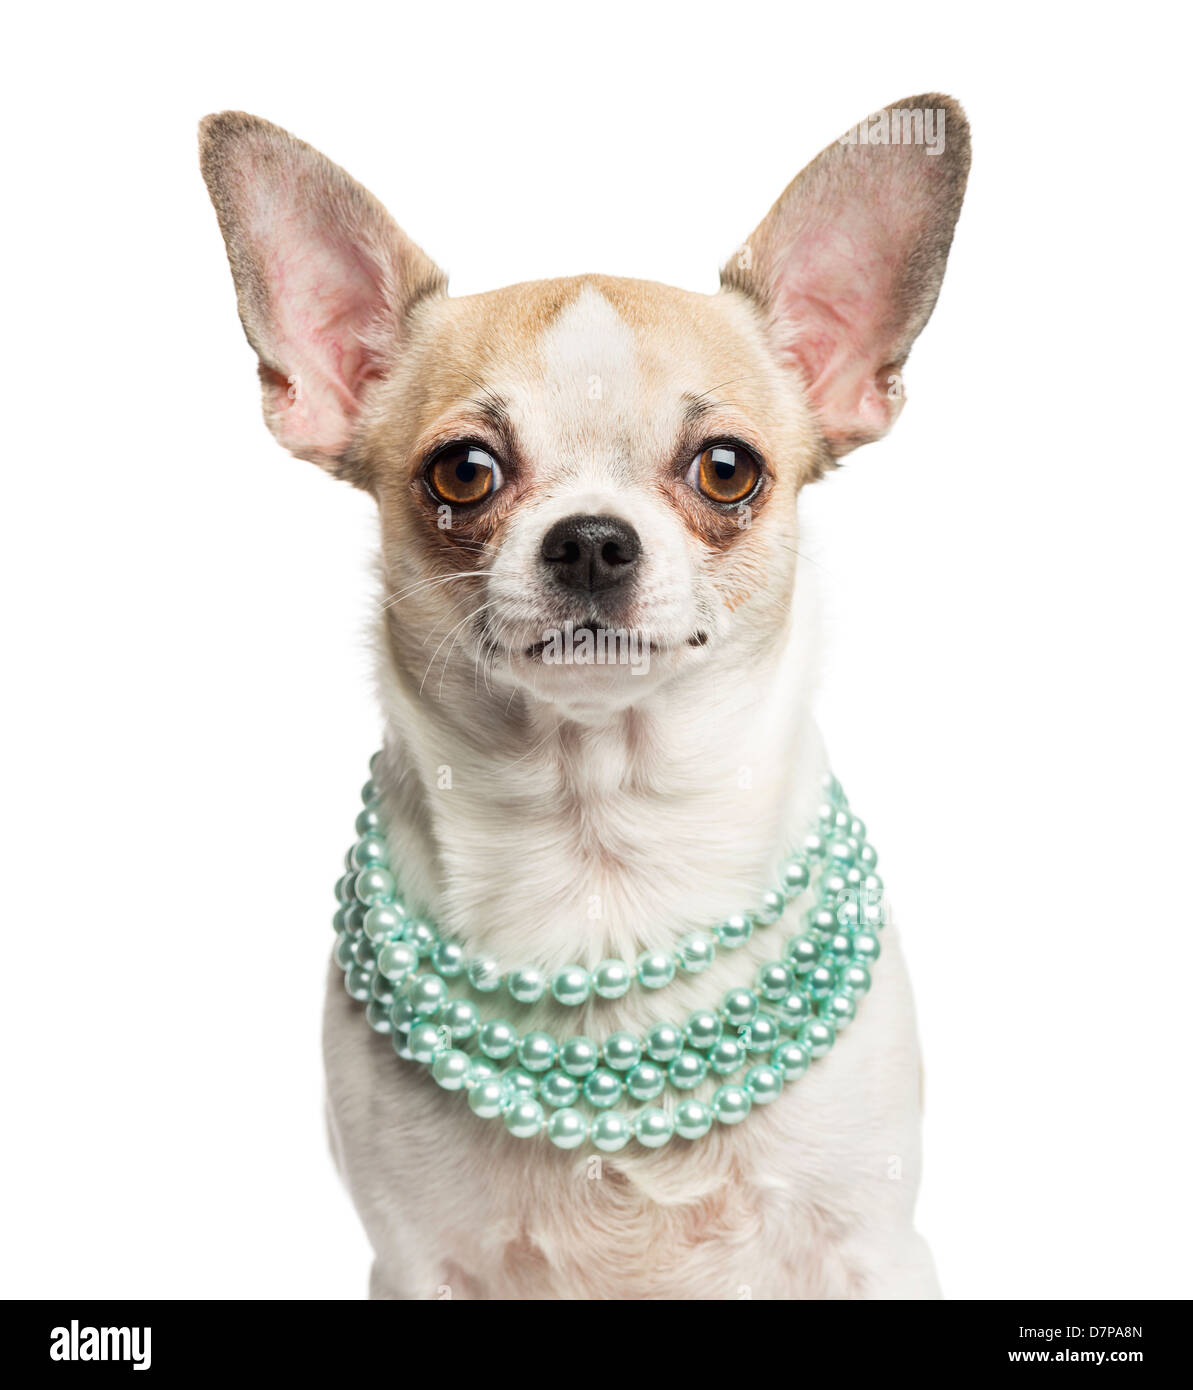 Close-up of a Chihuahua, 2 years old, wearing a pearl necklace against white background Stock Photo